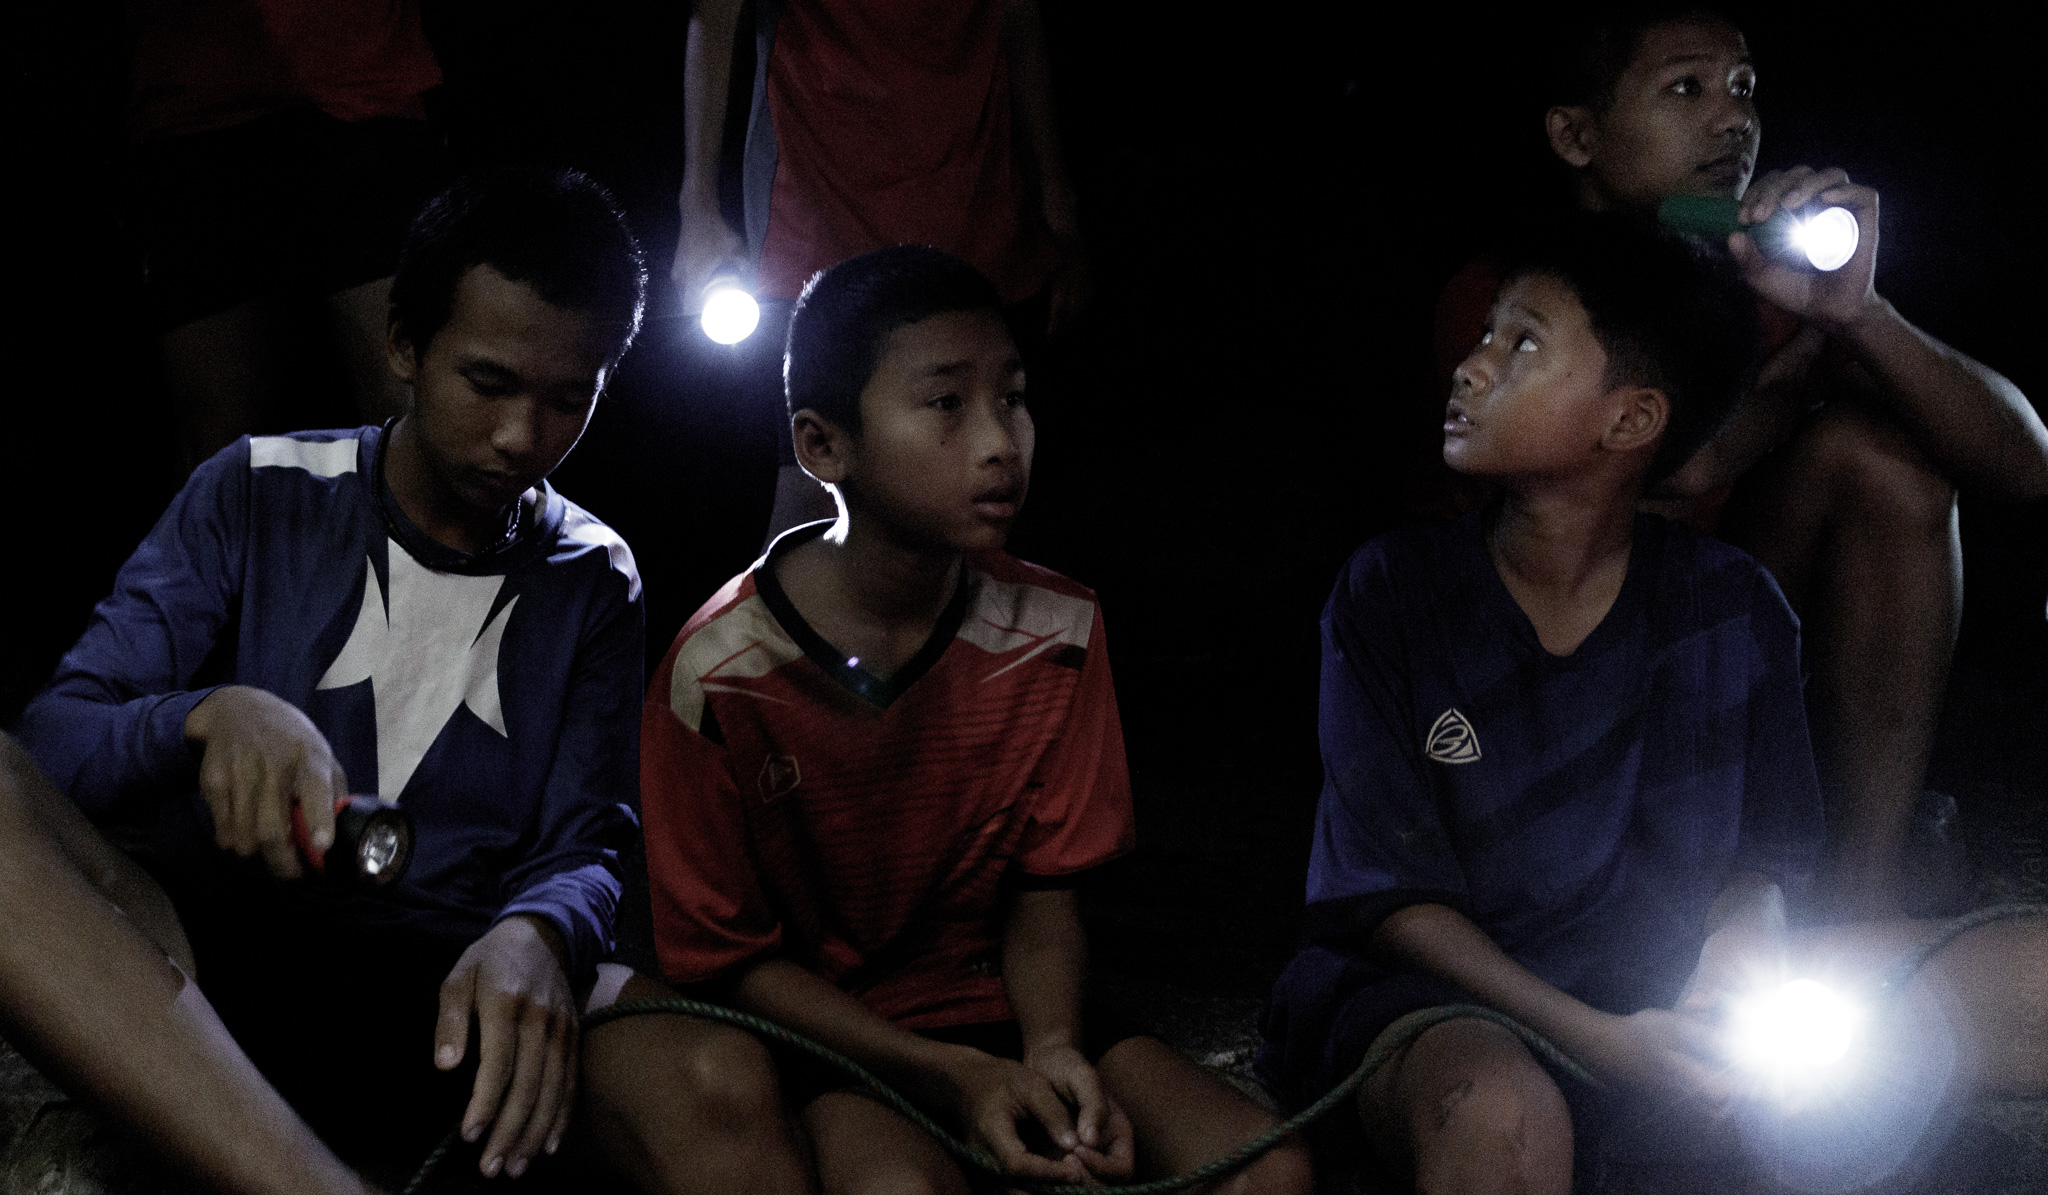  12 boys and their football coach get trapped in a cave in Northern Thailand. Photo (c) Fredrik Divall 